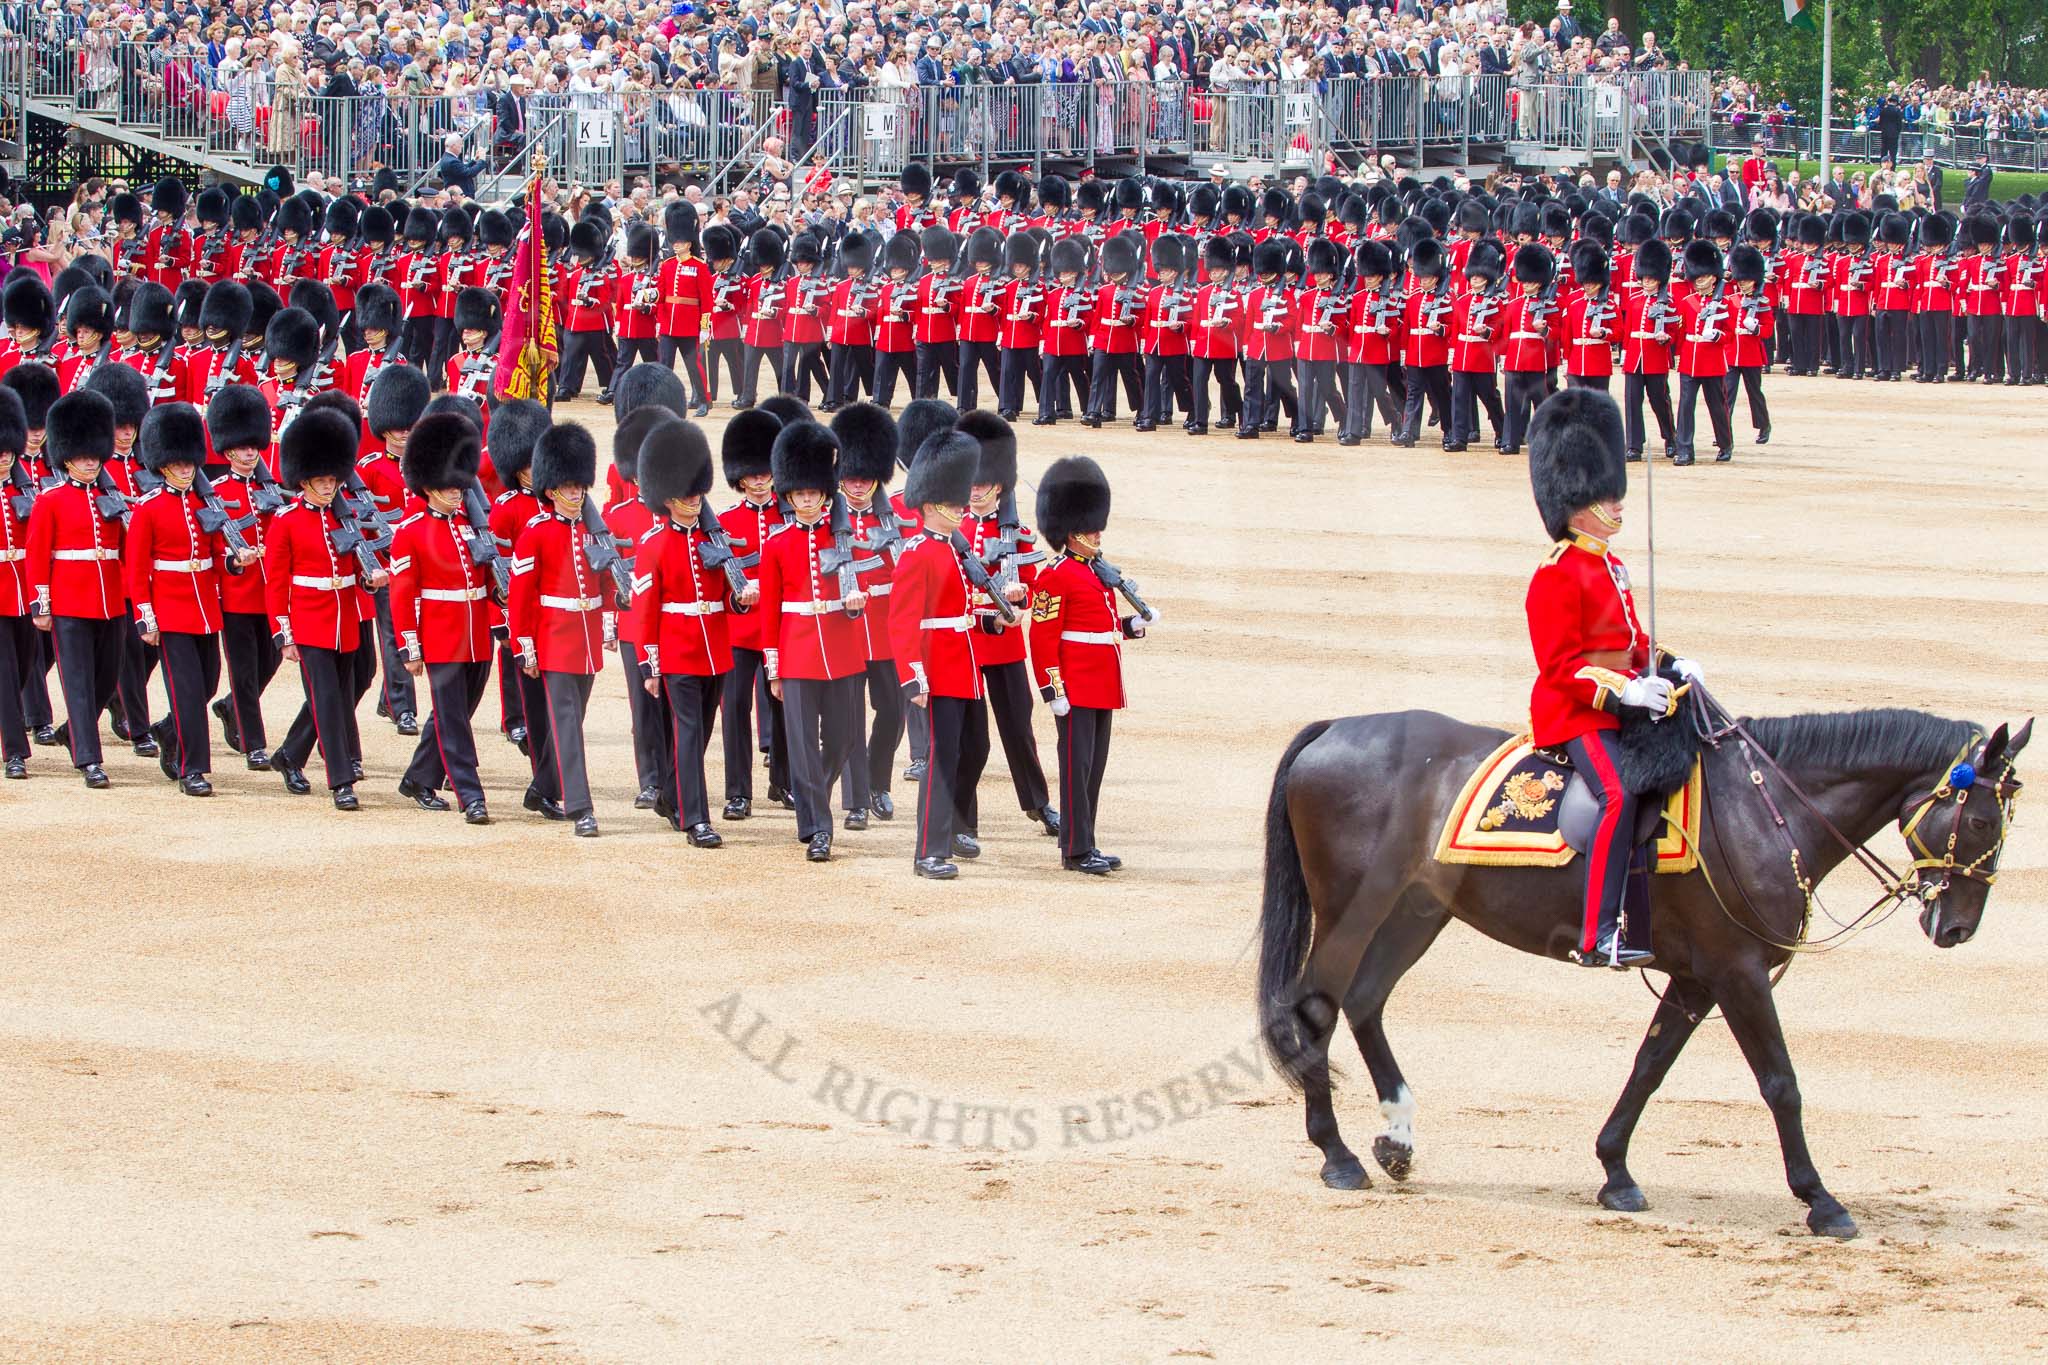 Trooping the Colour 2014.
Horse Guards Parade, Westminster,
London SW1A,

United Kingdom,
on 14 June 2014 at 11:36, image #613